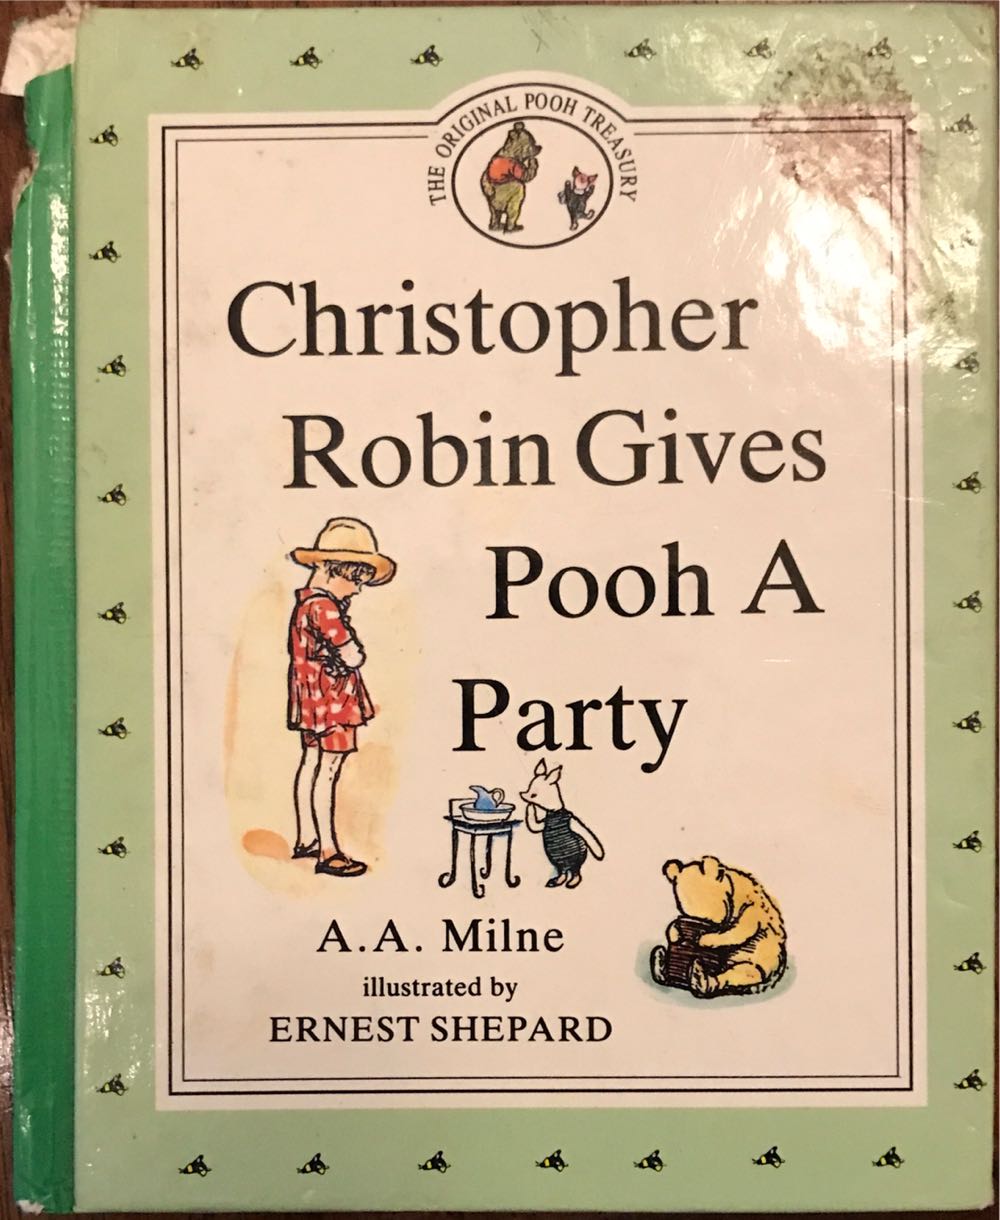 Christopher Robin Gives Pooh A Party - A. A. Milne (Dutton Children’s Books - Hardcover) book collectible [Barcode 9780525447146] - Main Image 3